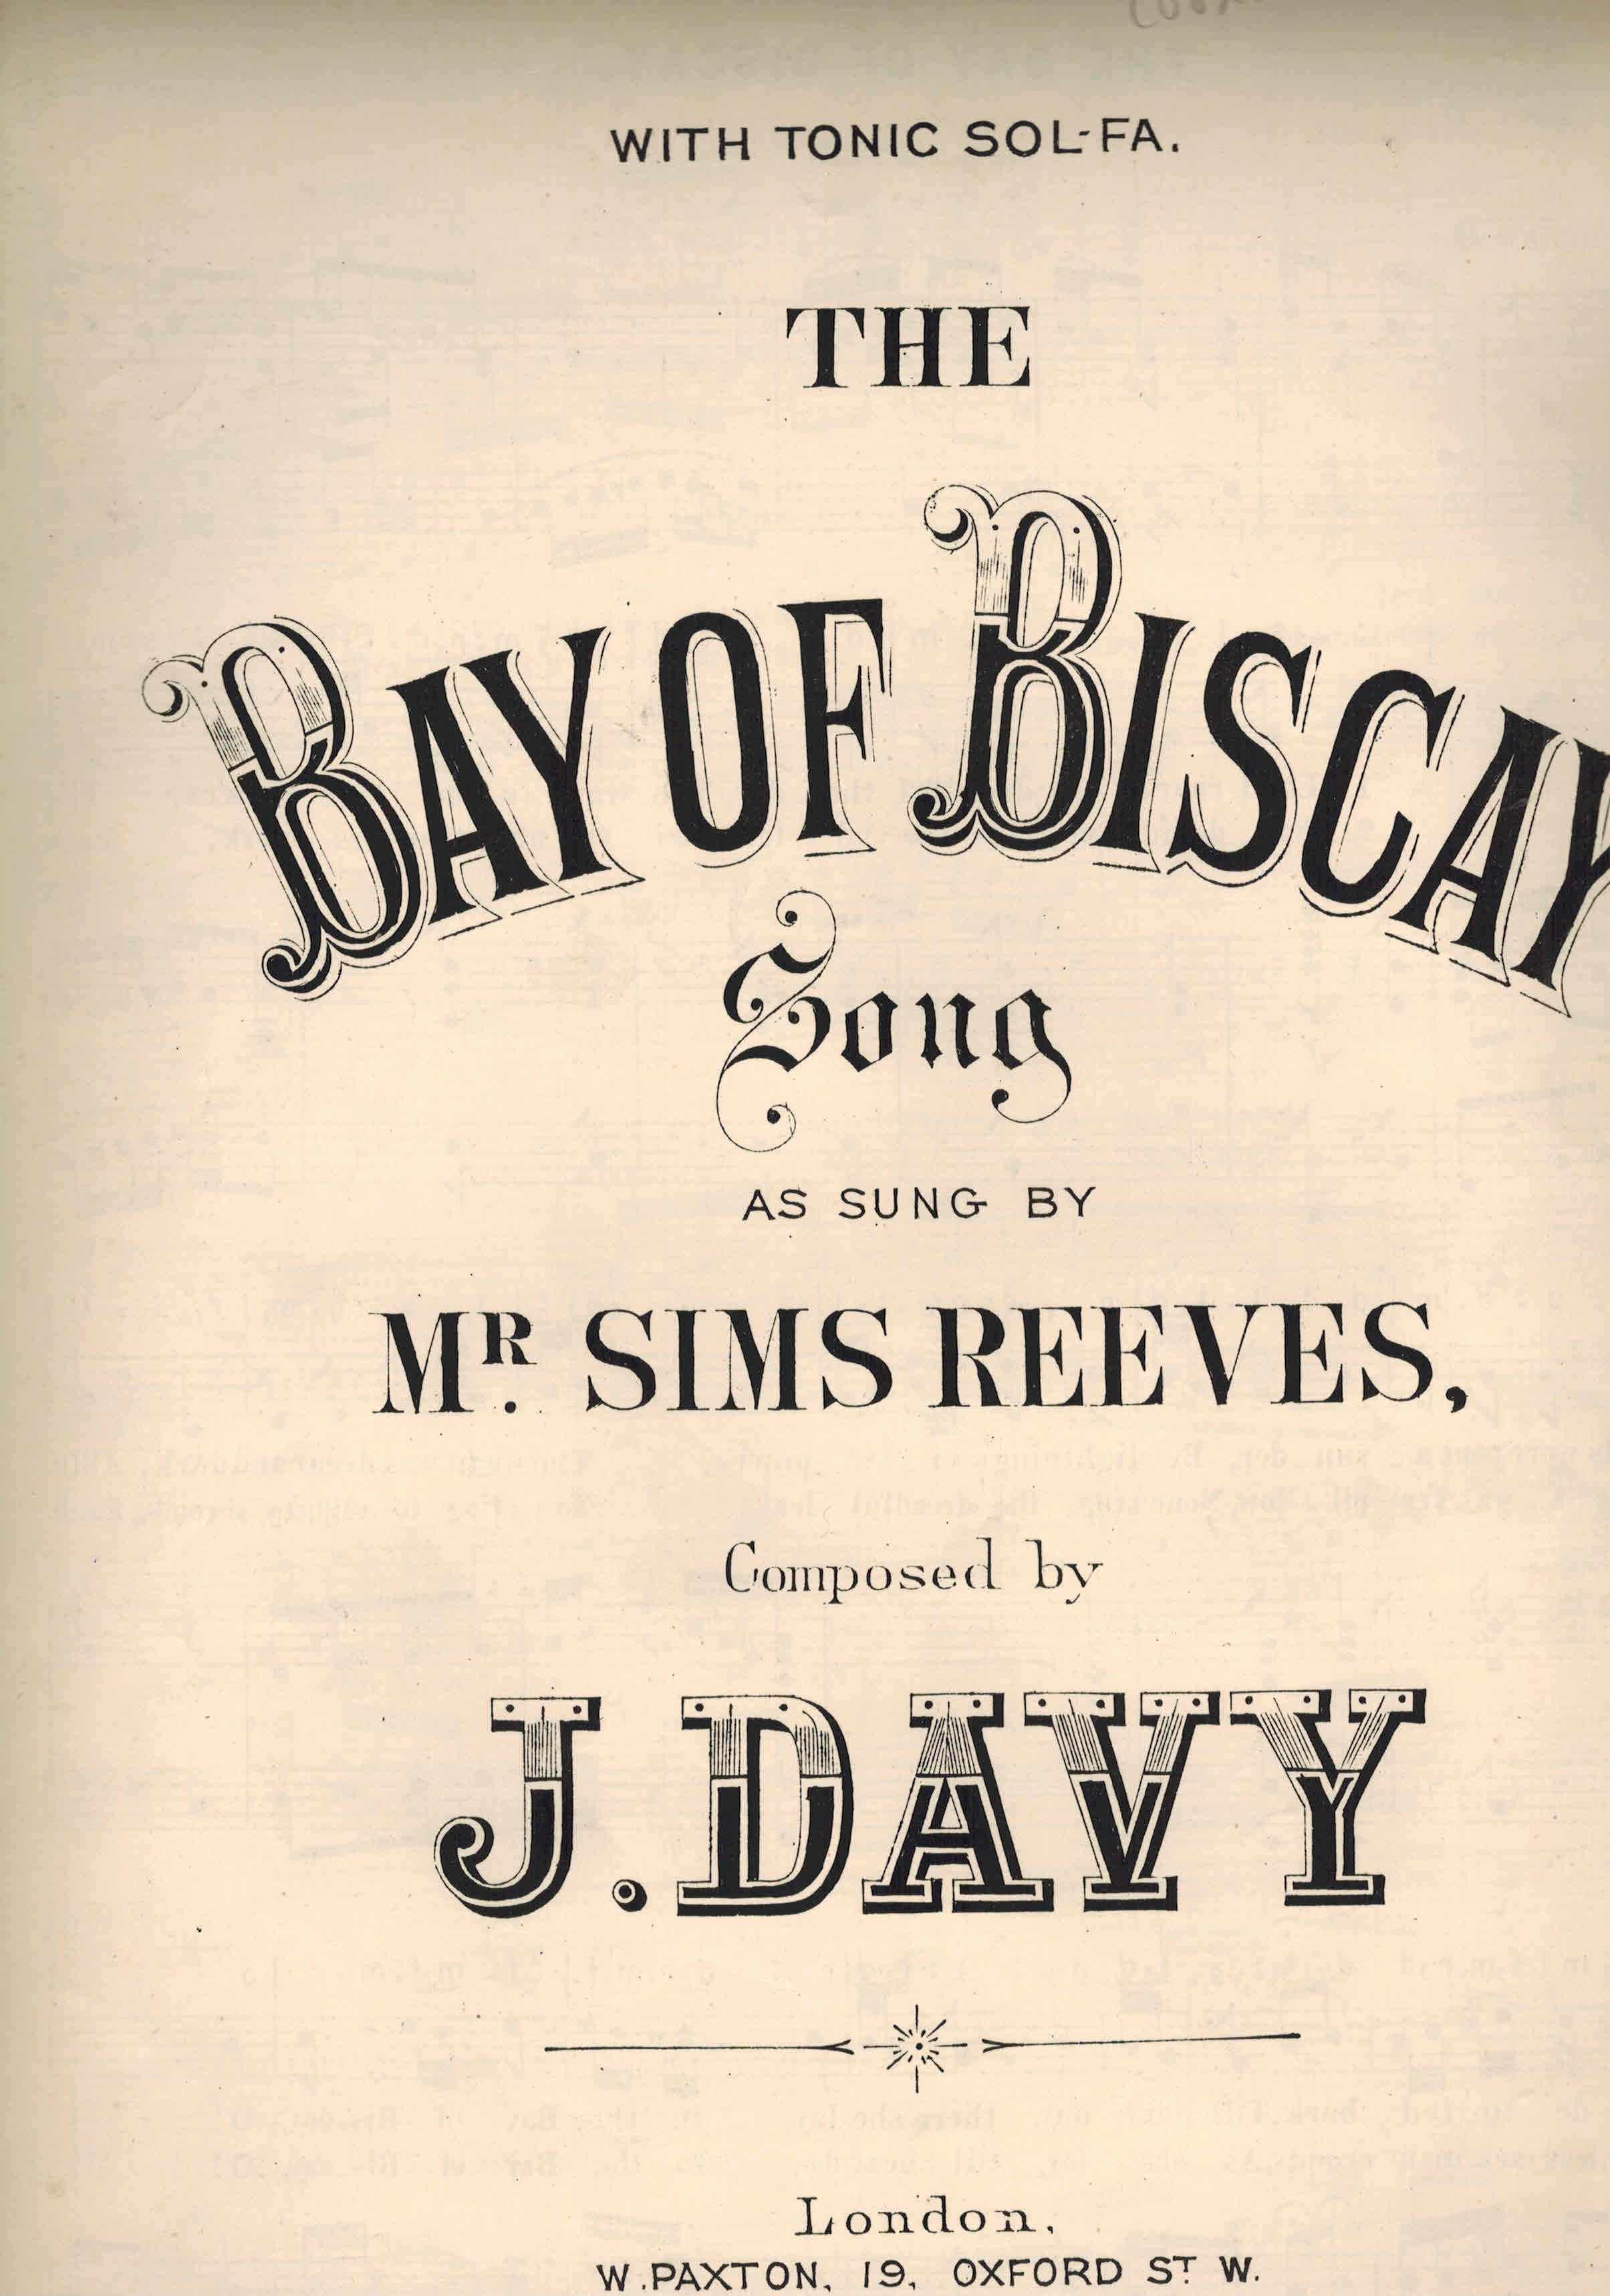 Image for The Bay of biscay - Vintage Sheet Music - as Sung By Mr. Sims Reeves